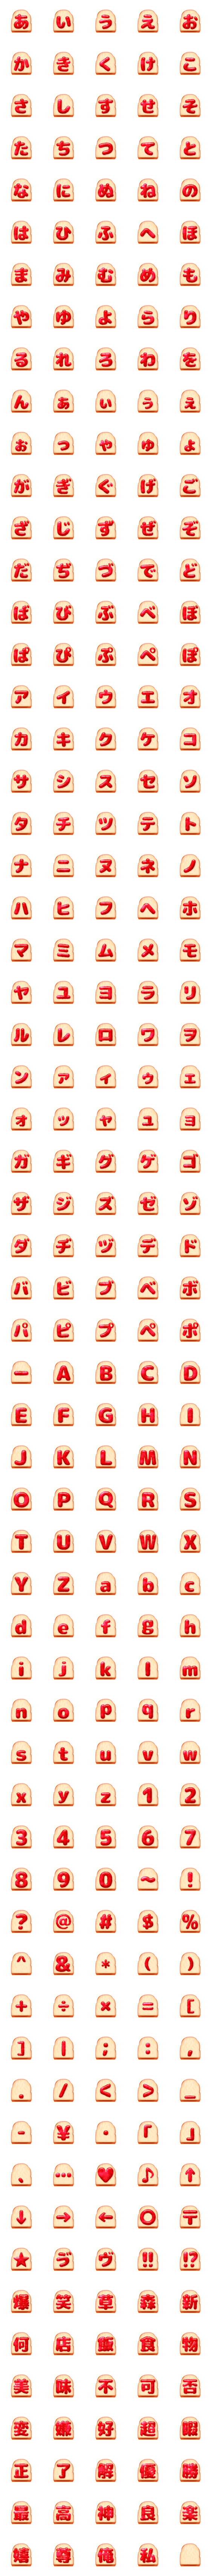 [LINE絵文字]いちごジャムパン デコ文字 丸ゴシックの画像一覧